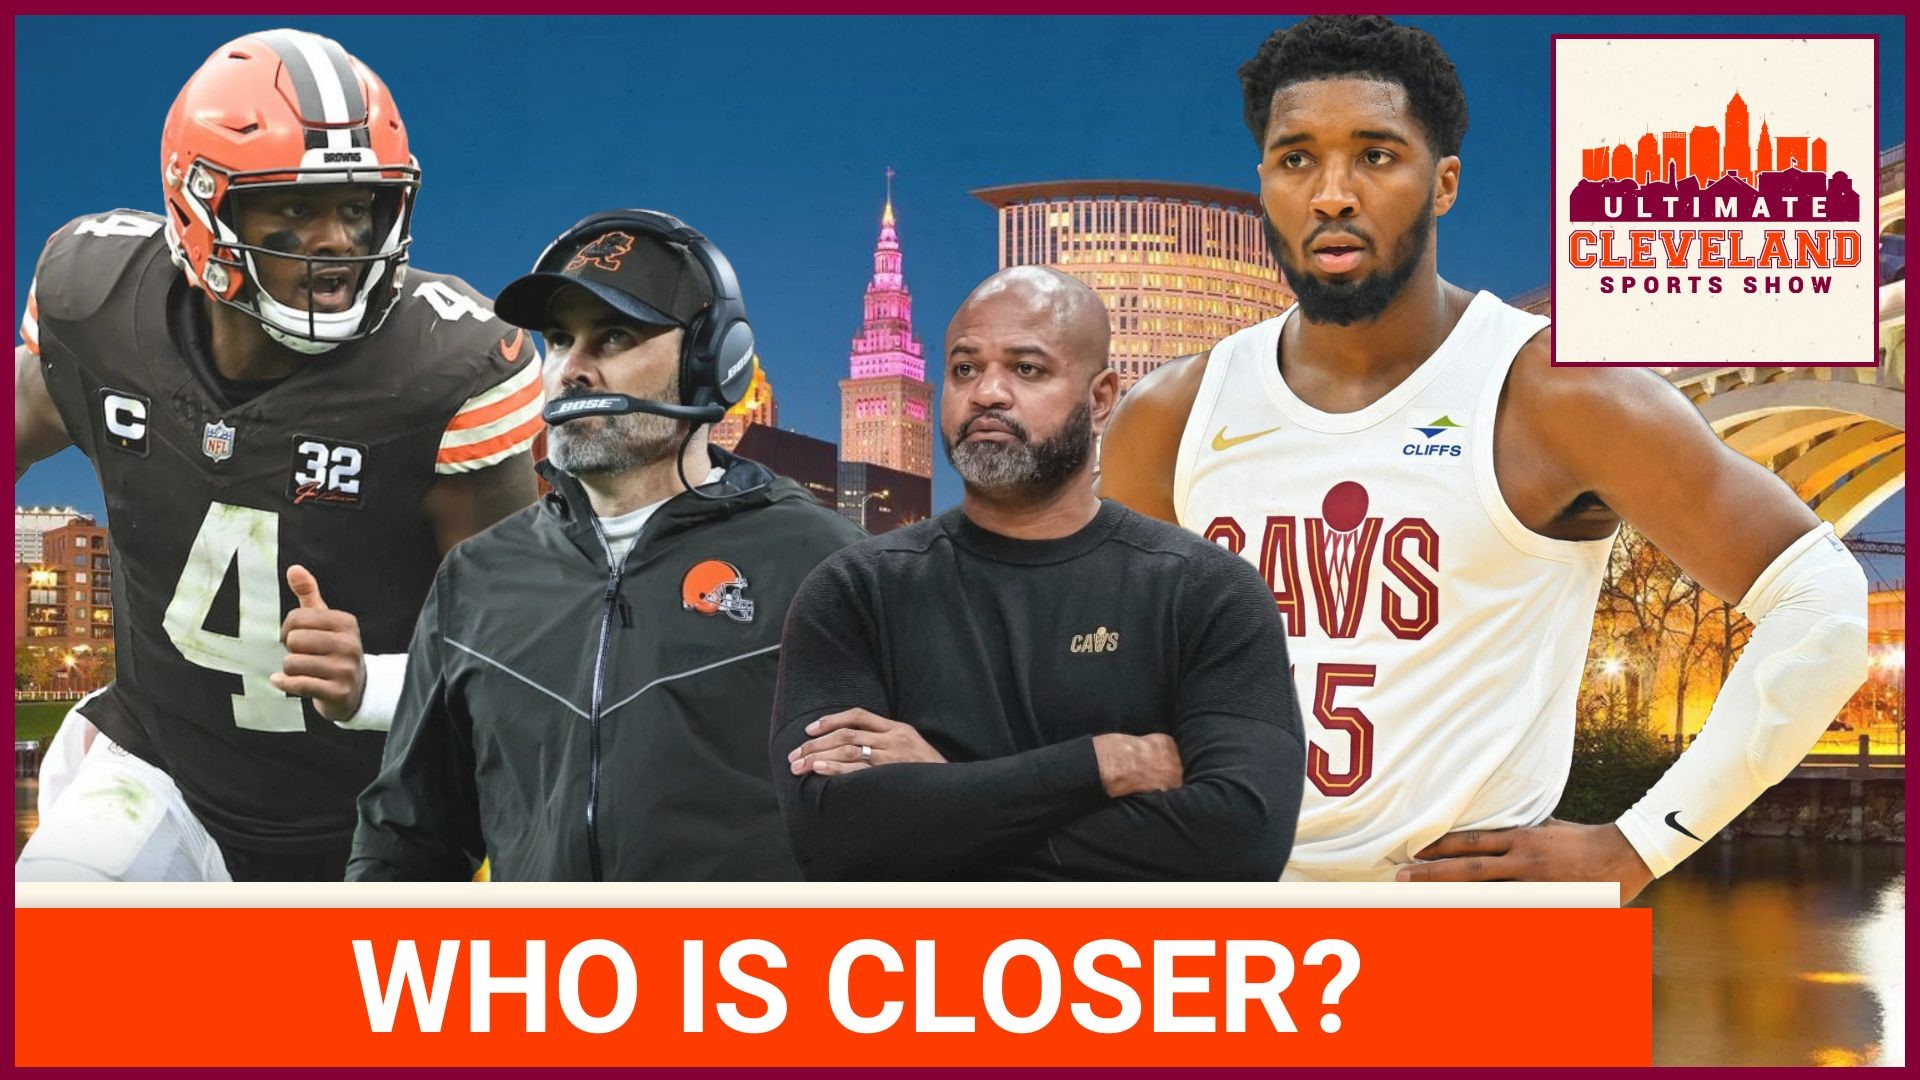 Which Cleveland team is closer to winning a championship now, the Browns or the Cavaliers?